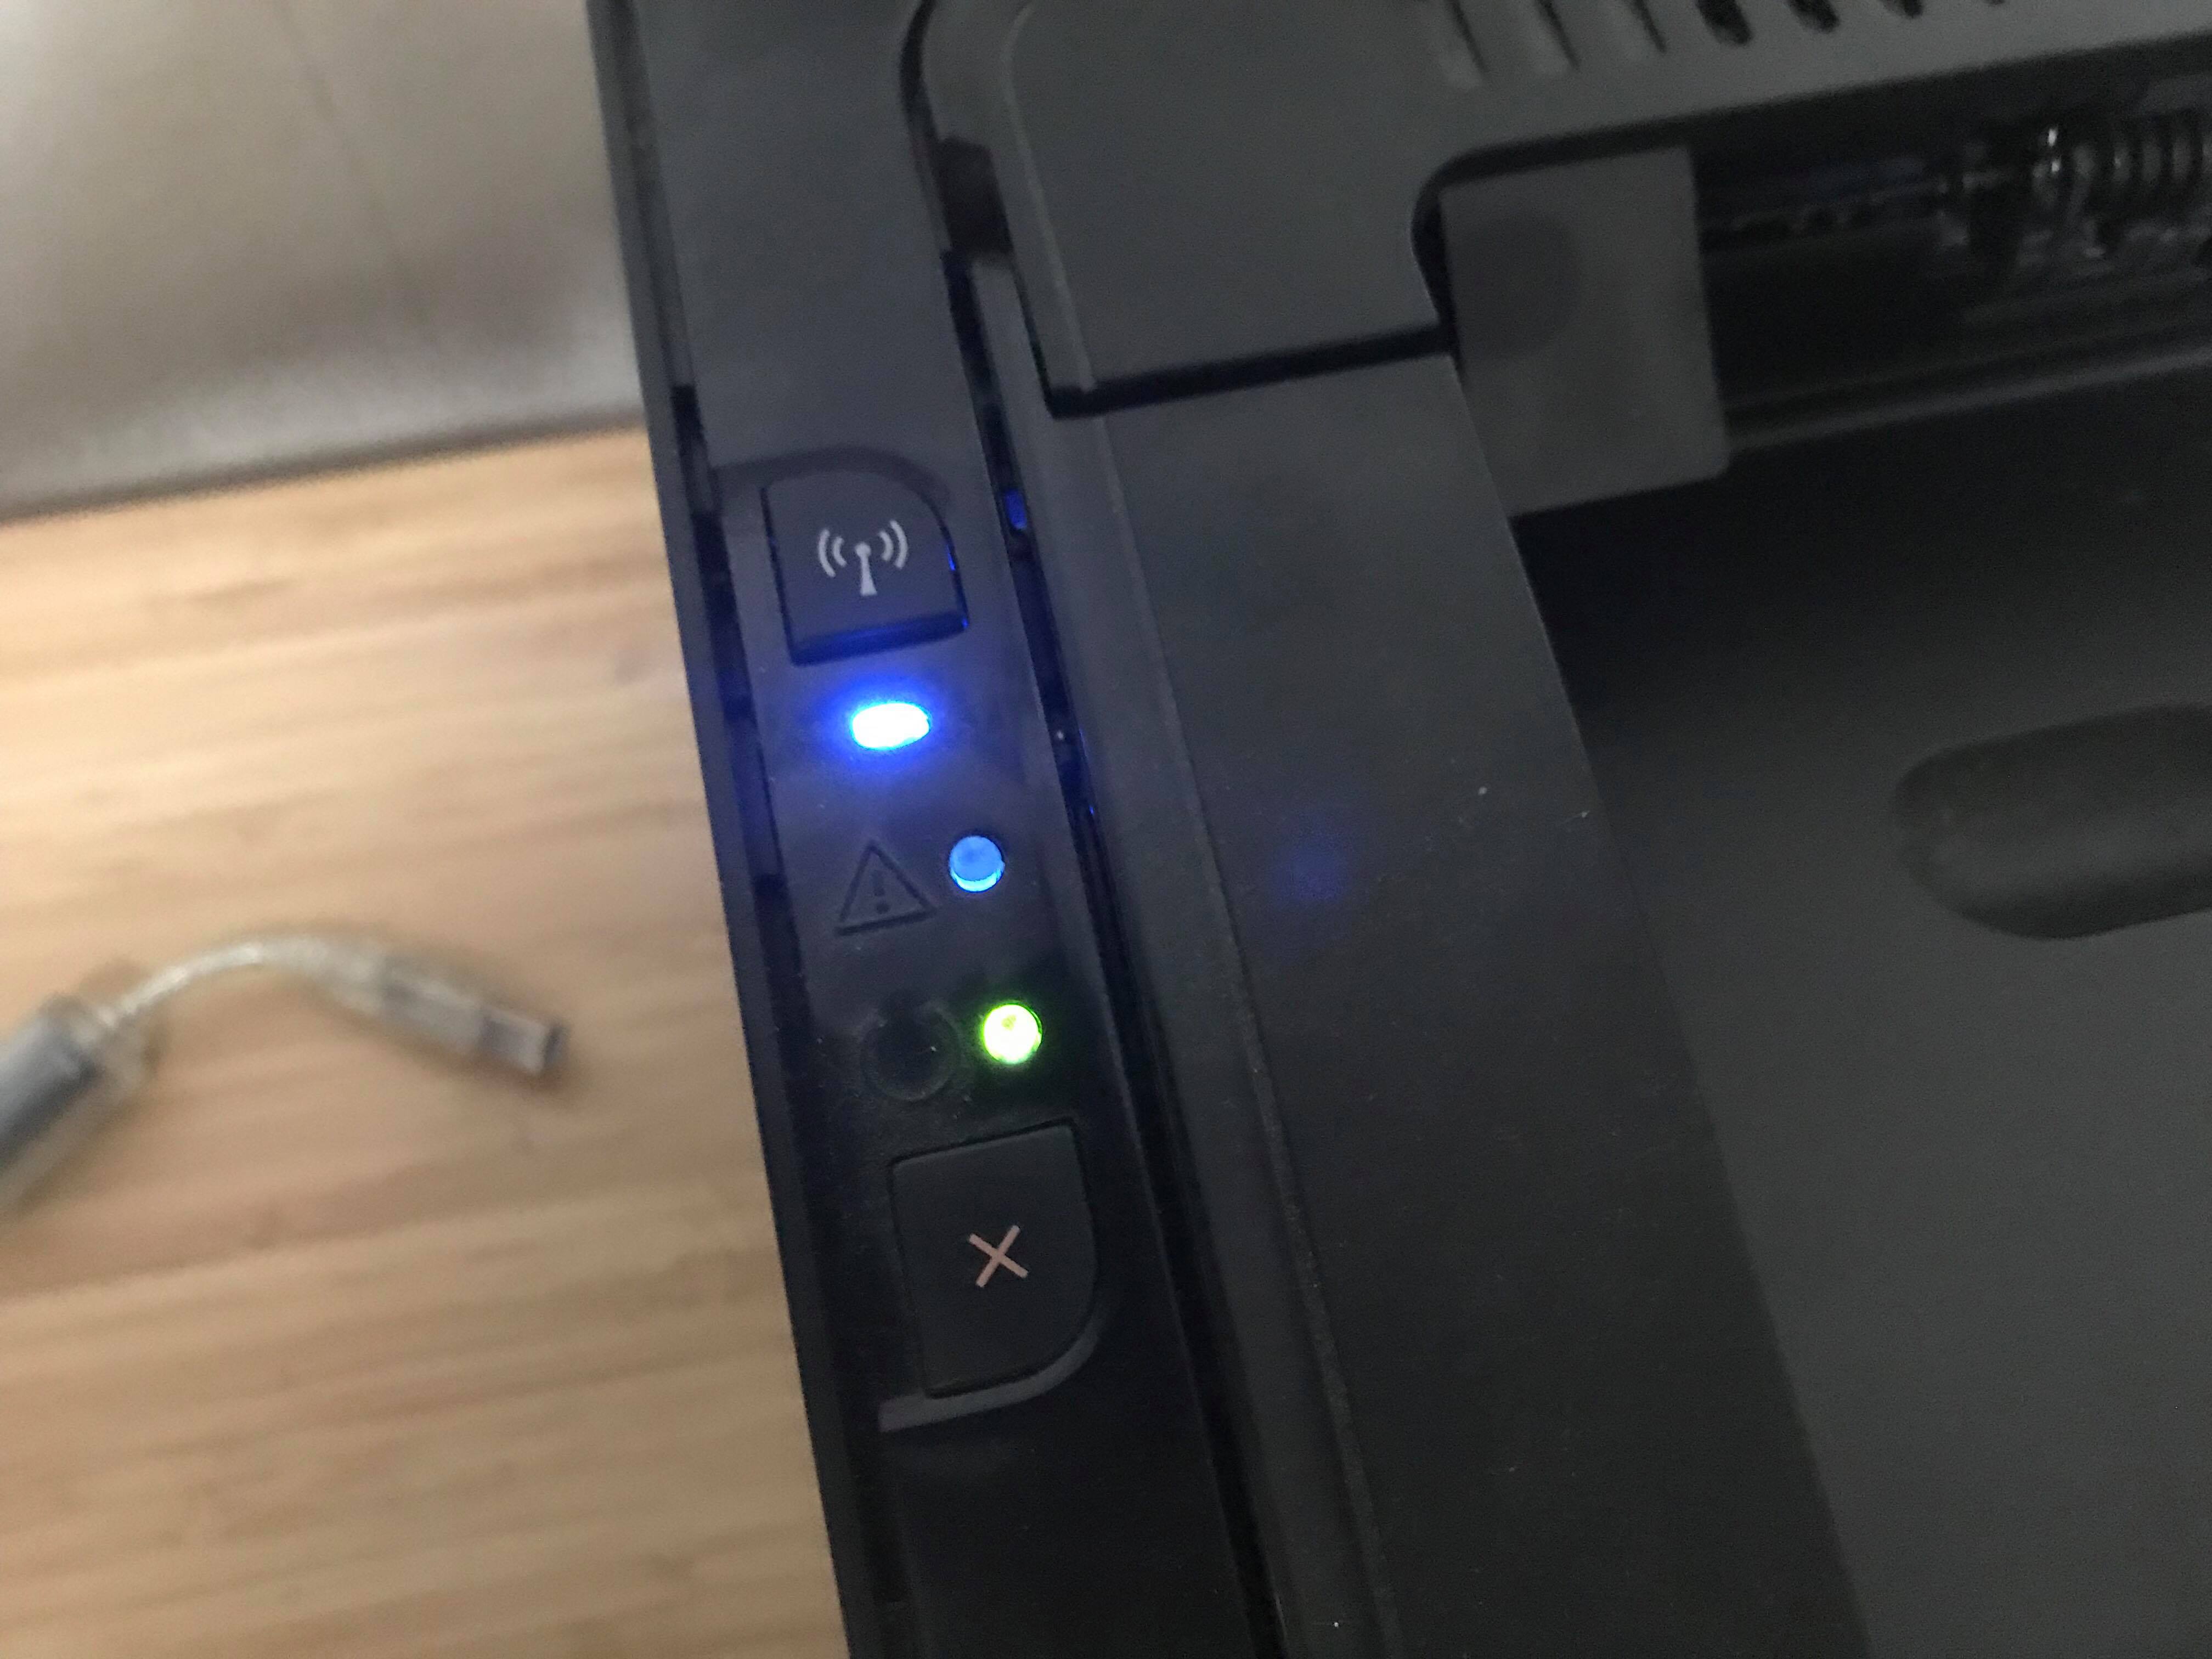 HP LaserJet P1102w connected to wifi but doesn't show up in ... - HP  Support Community - 7072823